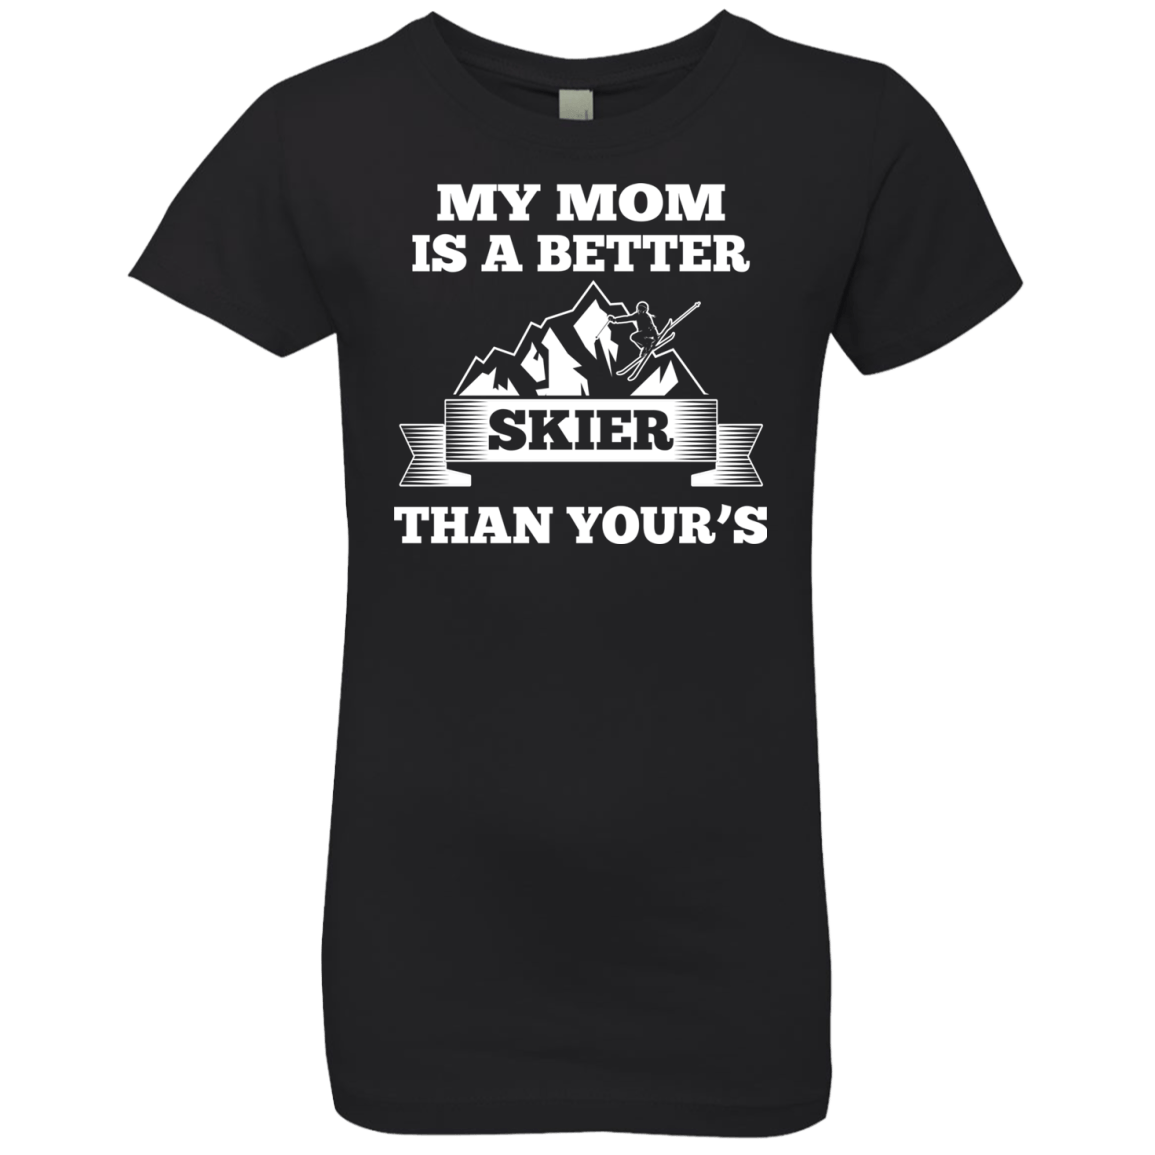 My Mom Is A Better Skier Than Yours White Youth Next Level Girls' Princess T-Shirt - Powderaddicts